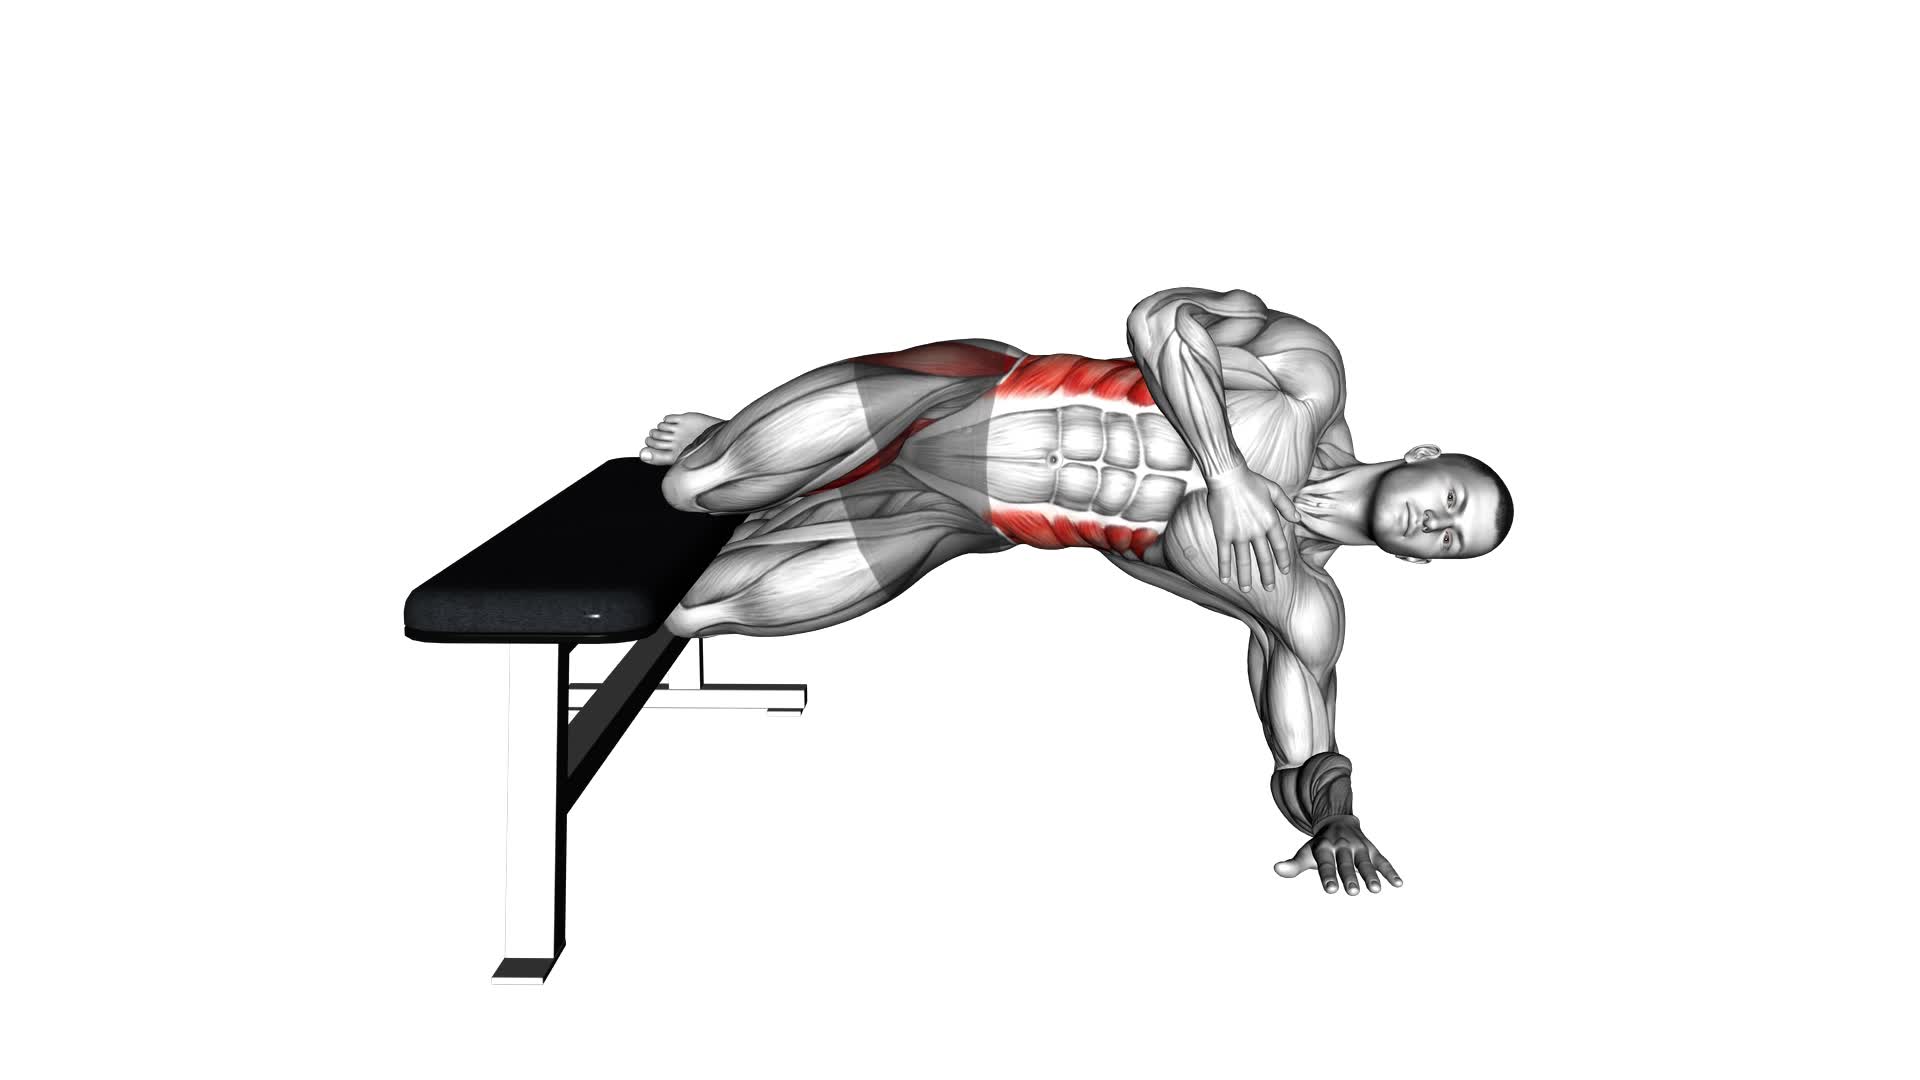 Side Plank Hip Adduction (Bent Knee) - Video Exercise Guide & Tips